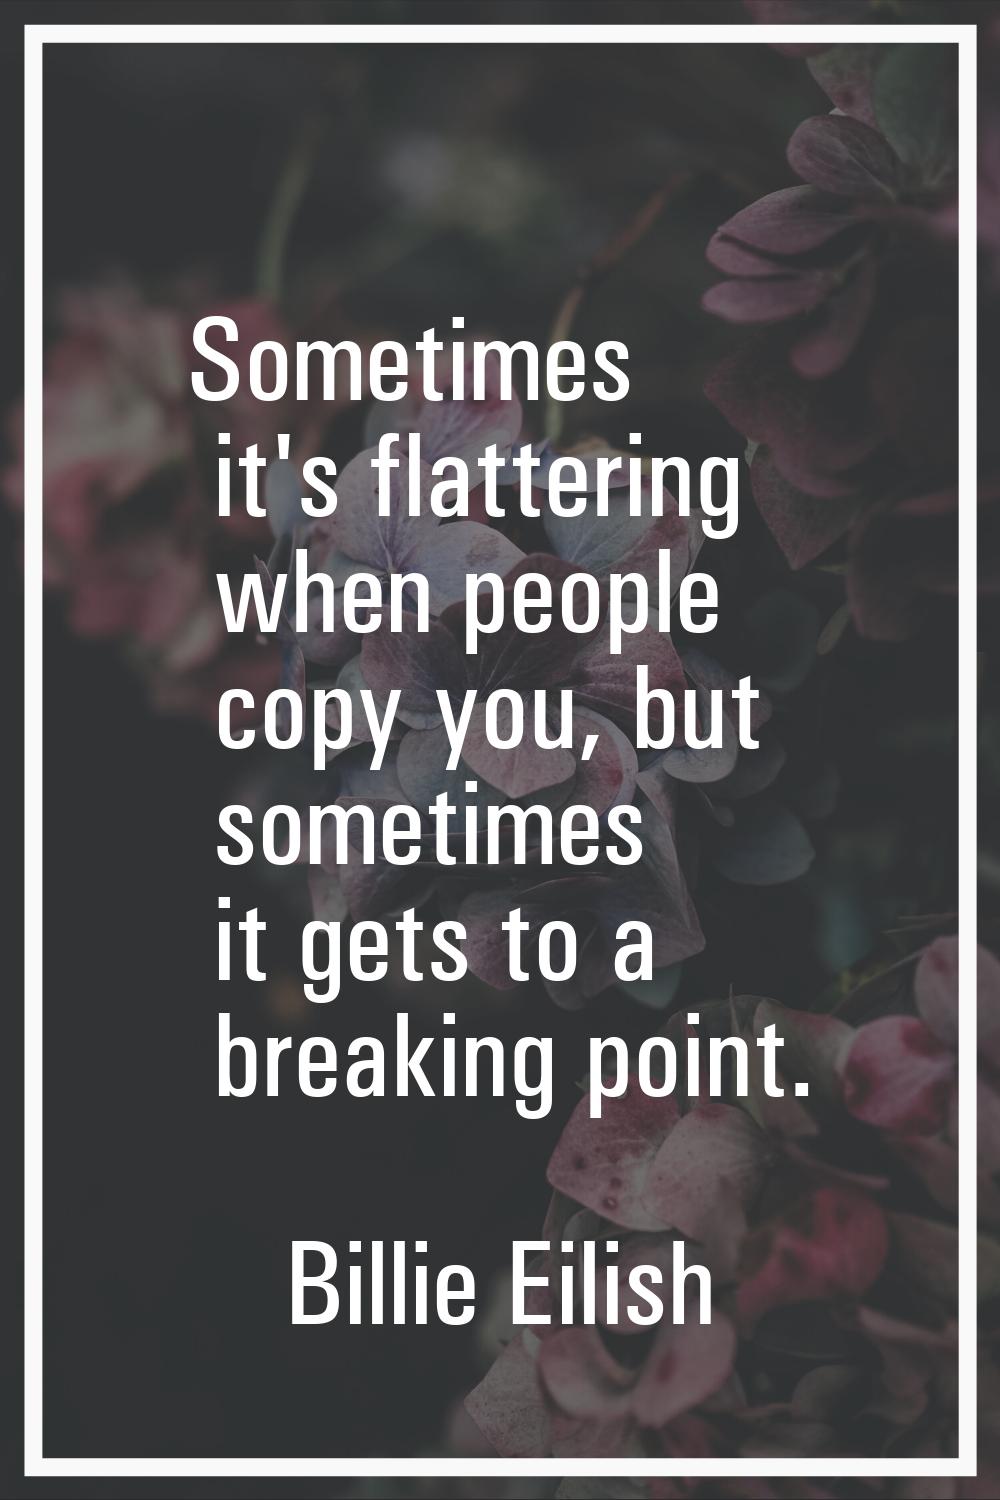 Sometimes it's flattering when people copy you, but sometimes it gets to a breaking point.